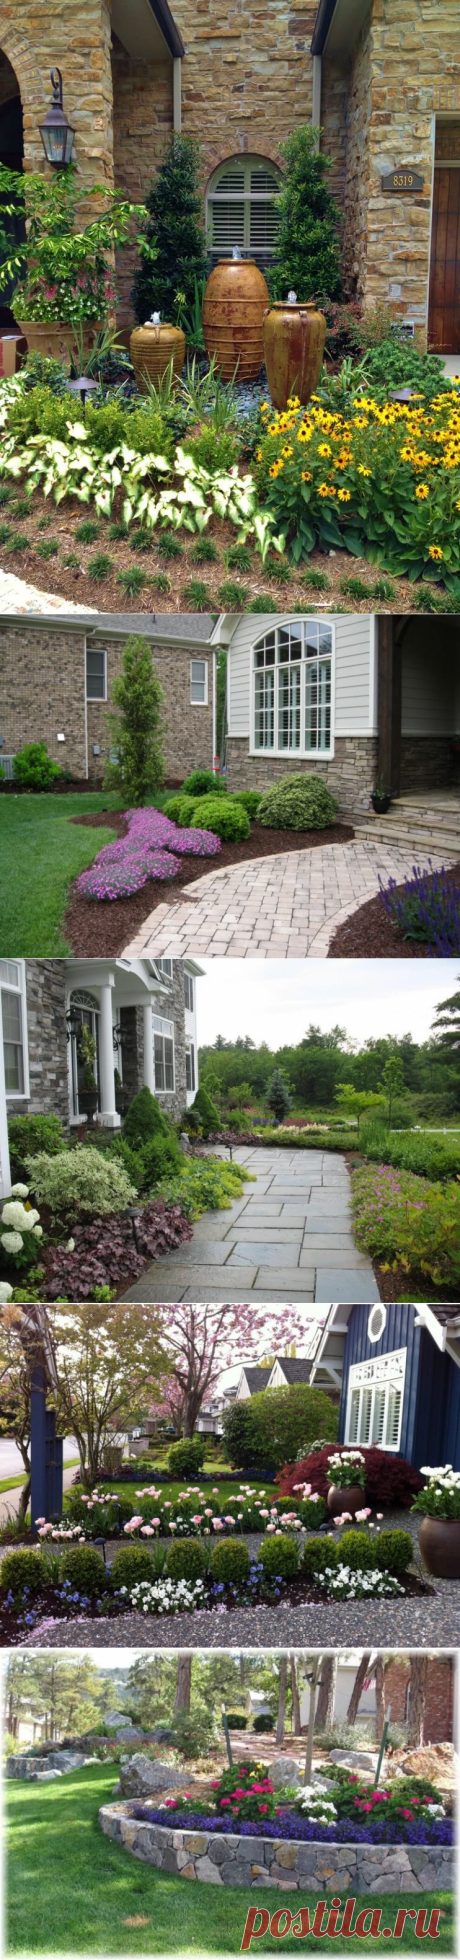 50+ Beautiful Front Yard Landscaping Ideas